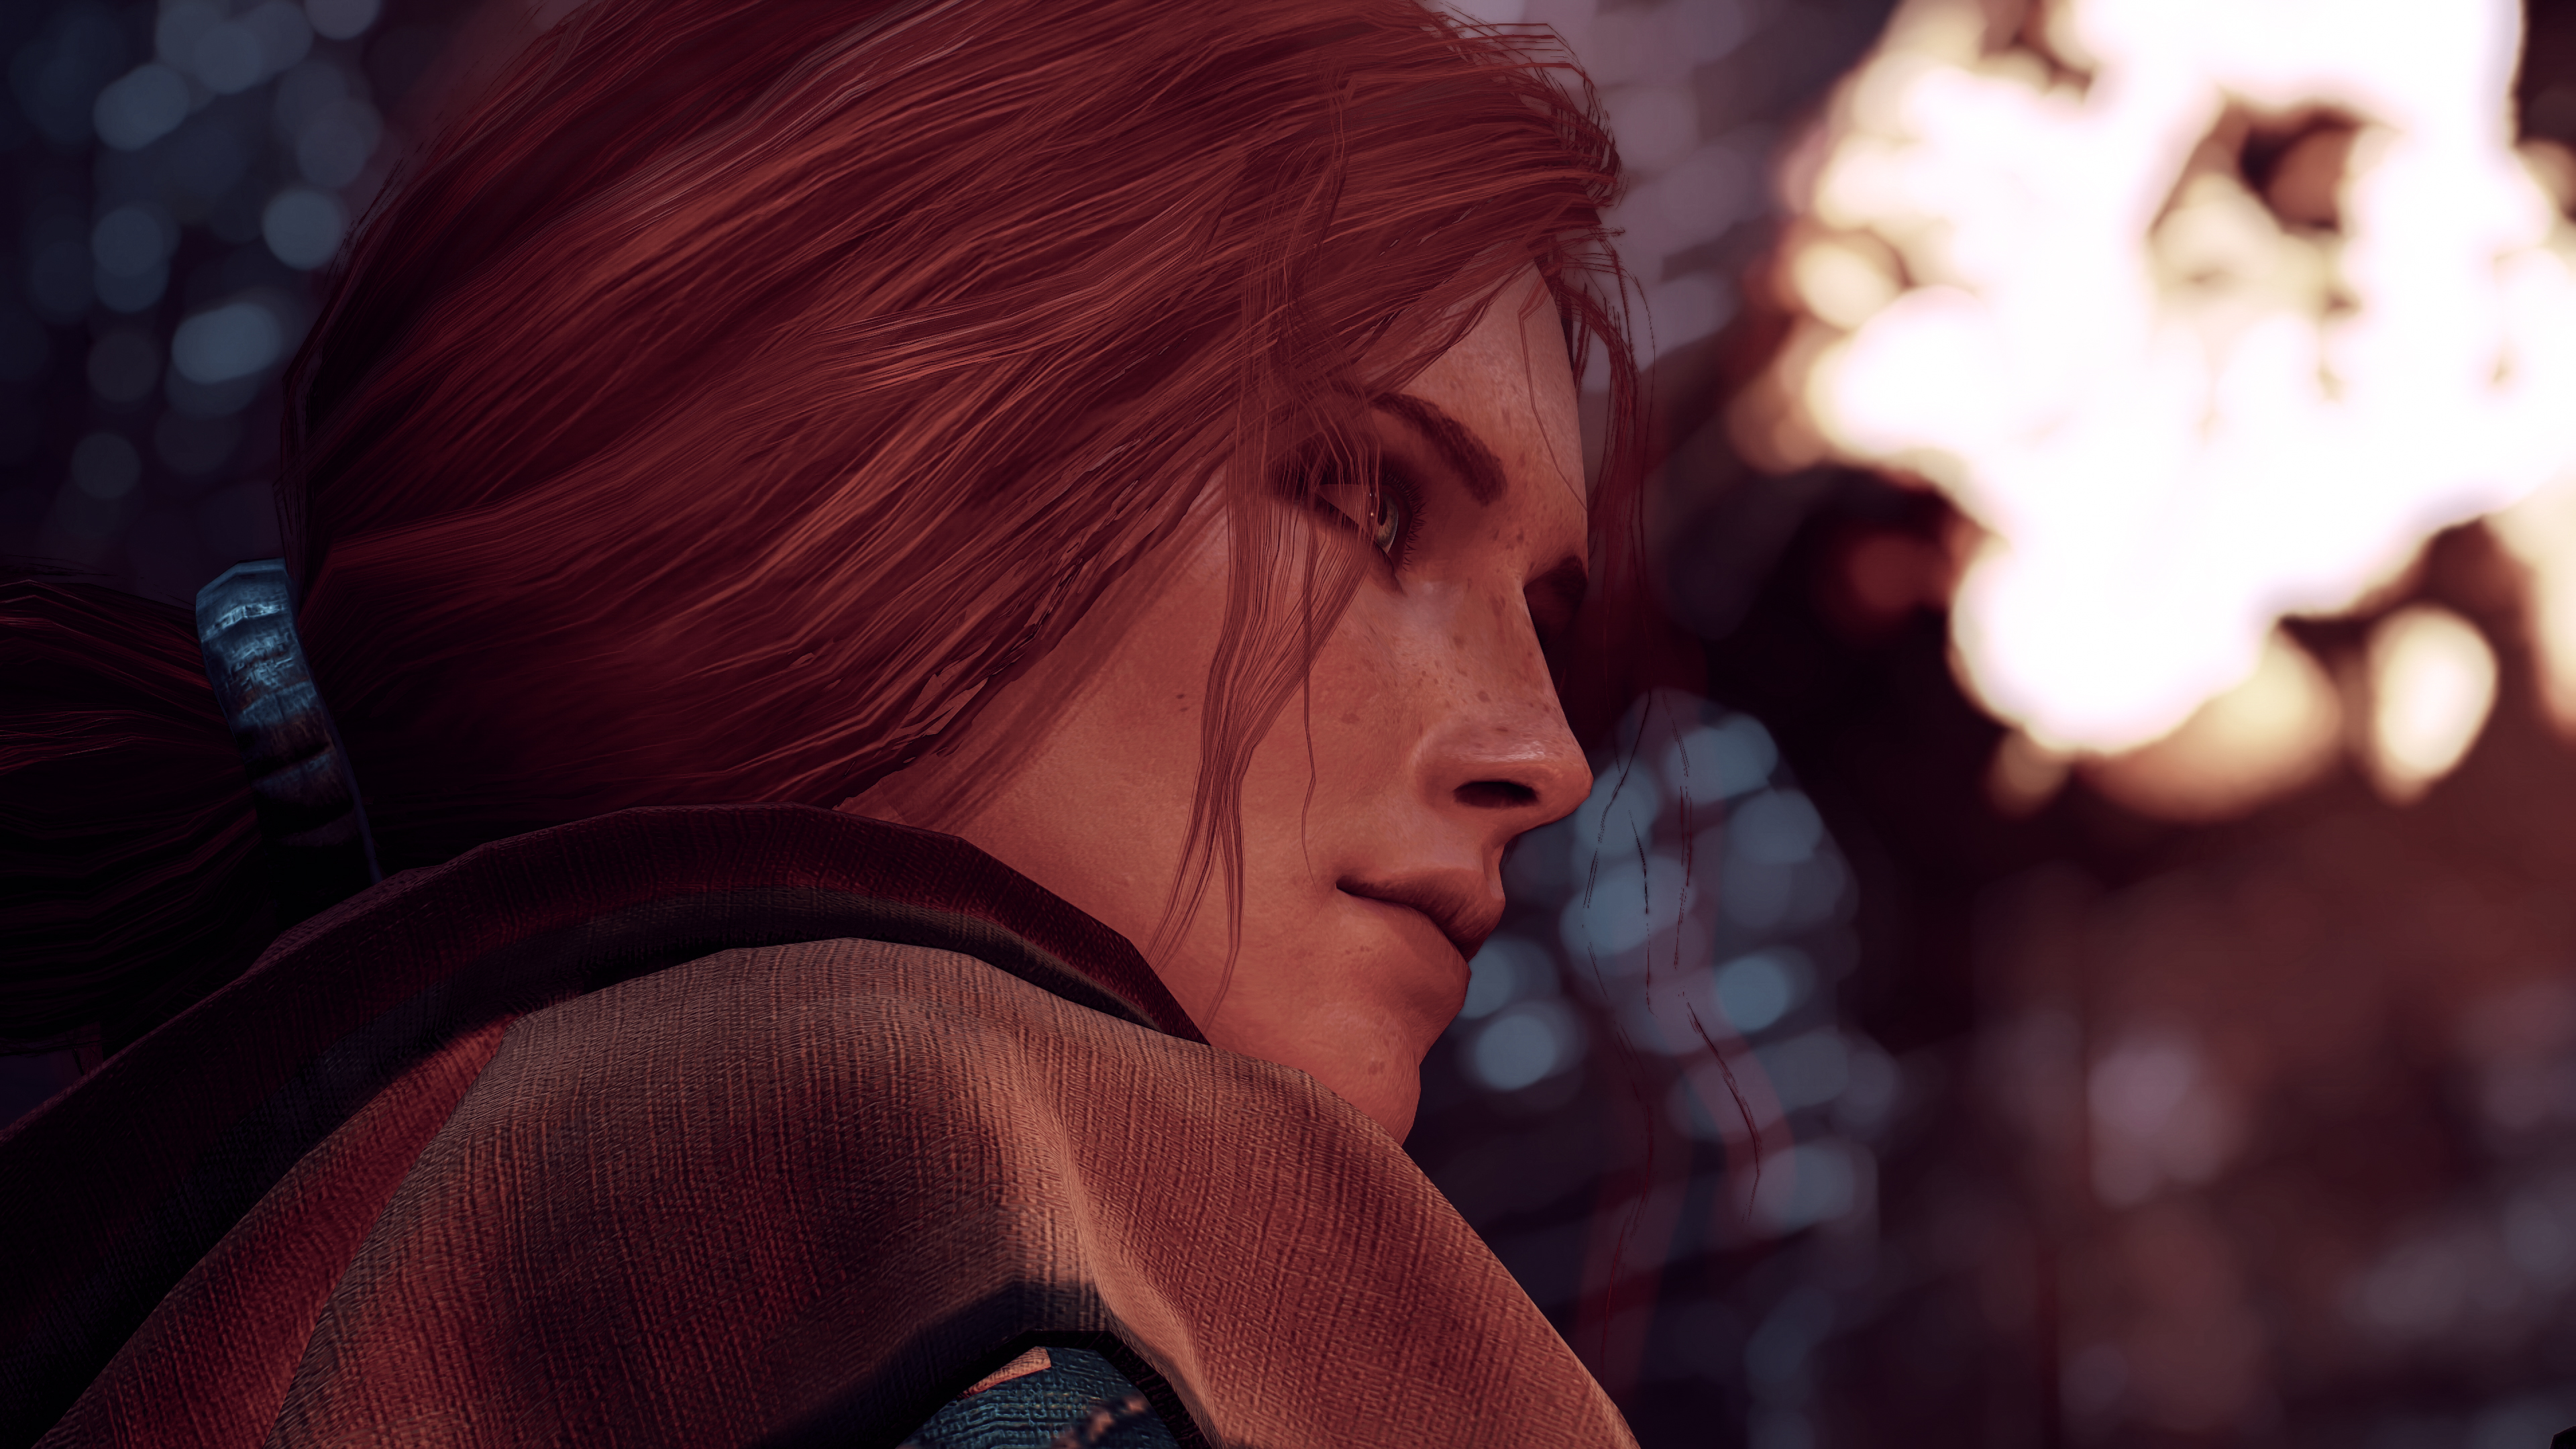 General 3840x2160 The Witcher The Witcher 3: Wild Hunt screen shot PC gaming face women redhead Triss Merigold